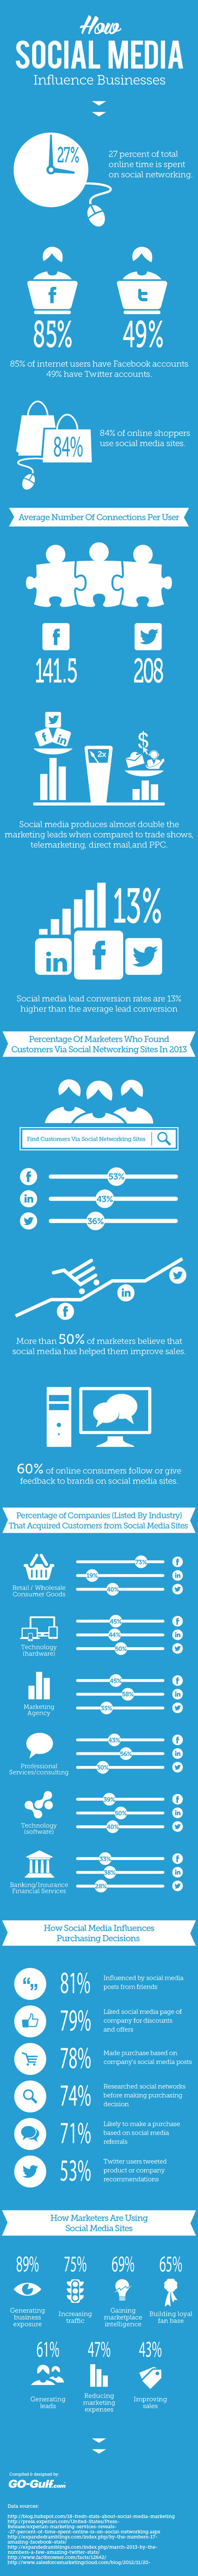 How Social Media Influence Businesses | Great #Infographic from Visual.ly | Digital-News on Scoop.it today | Scoop.it